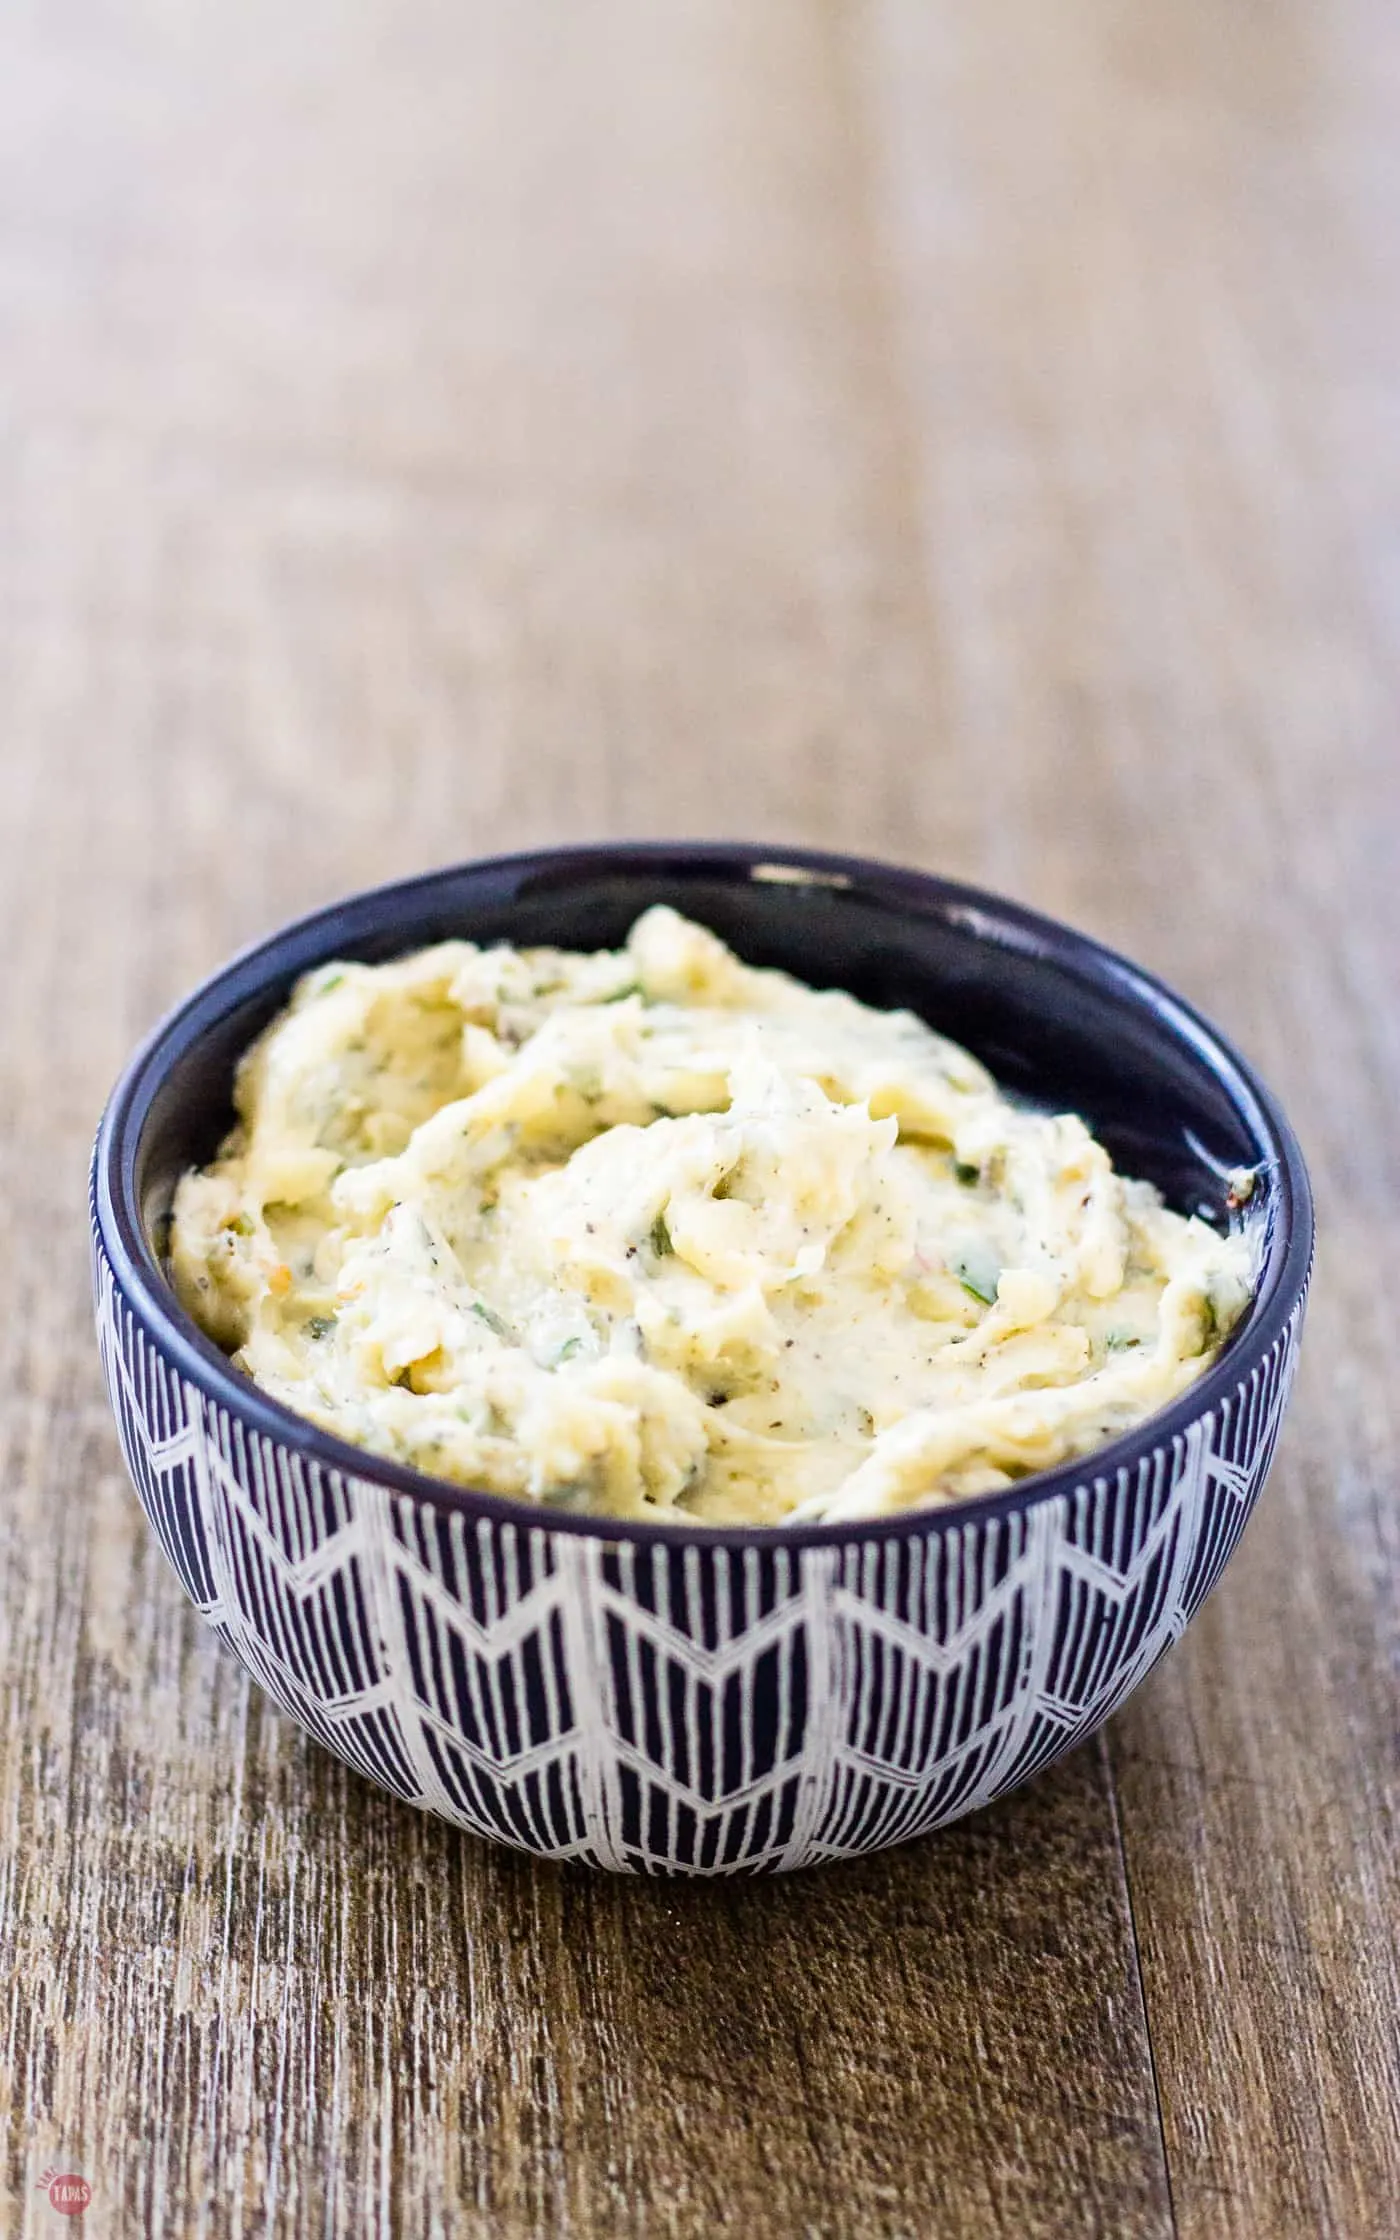 Have fresh herbs left over? Mix them with butter and roasted garlic to make a compound butter. My roasted garlic spread will blow your mind! | Take Two Tapas | #RoastedGarlic #CompoundButter #FreshHerbs #ButterRecipe #GarlicSpread